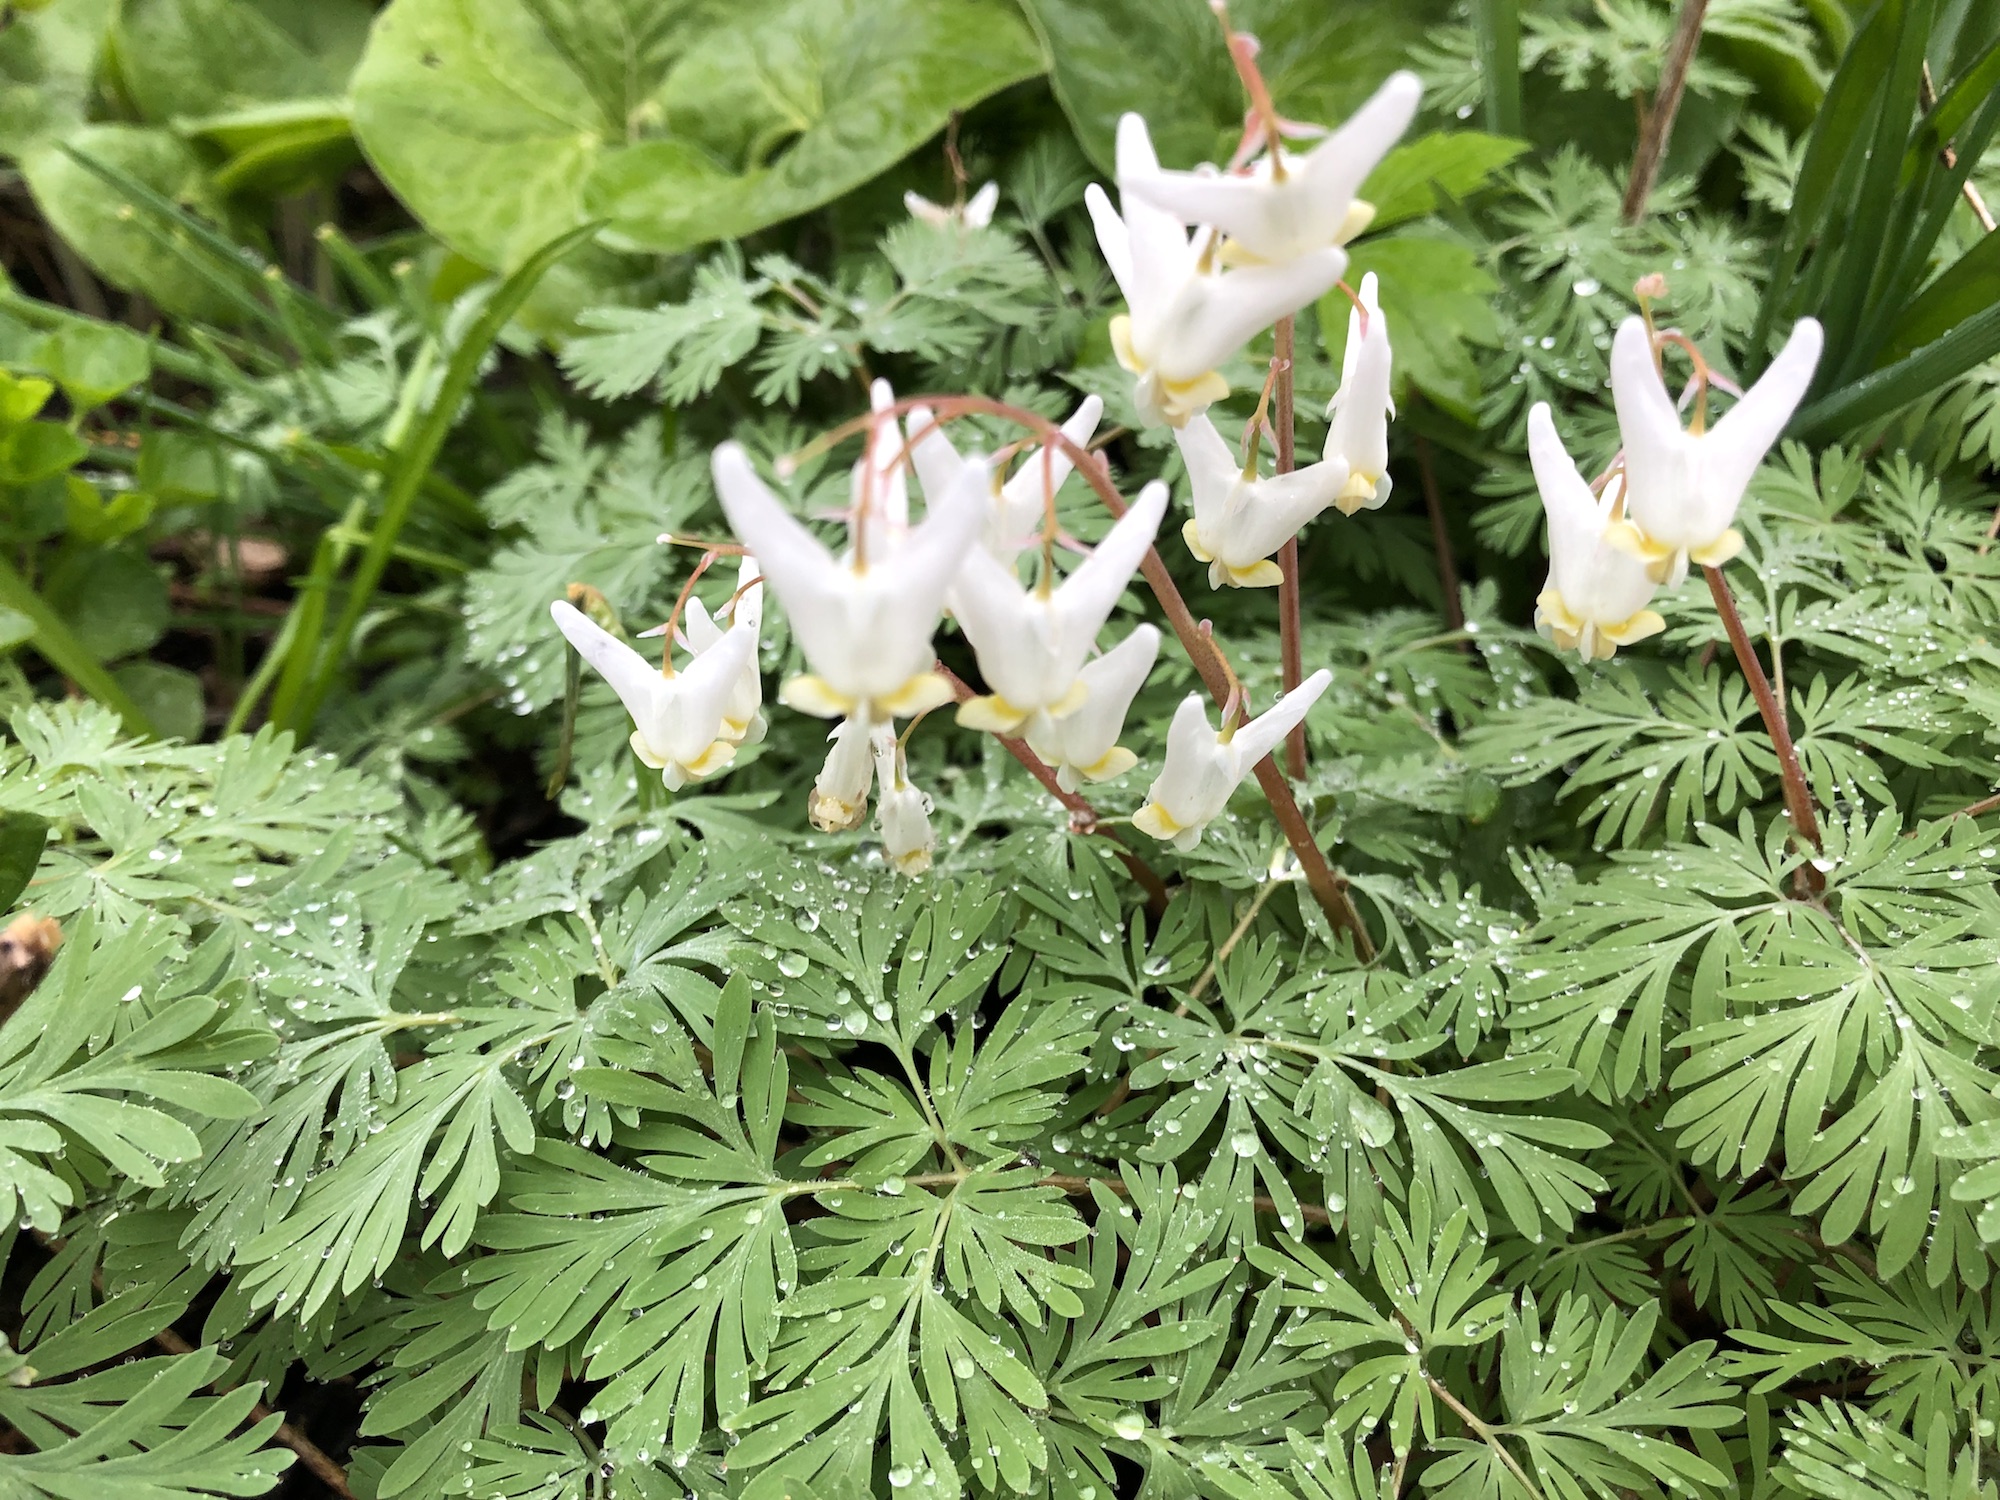 Dutchman's Breeches by Duck Pond on April 30, 2019.